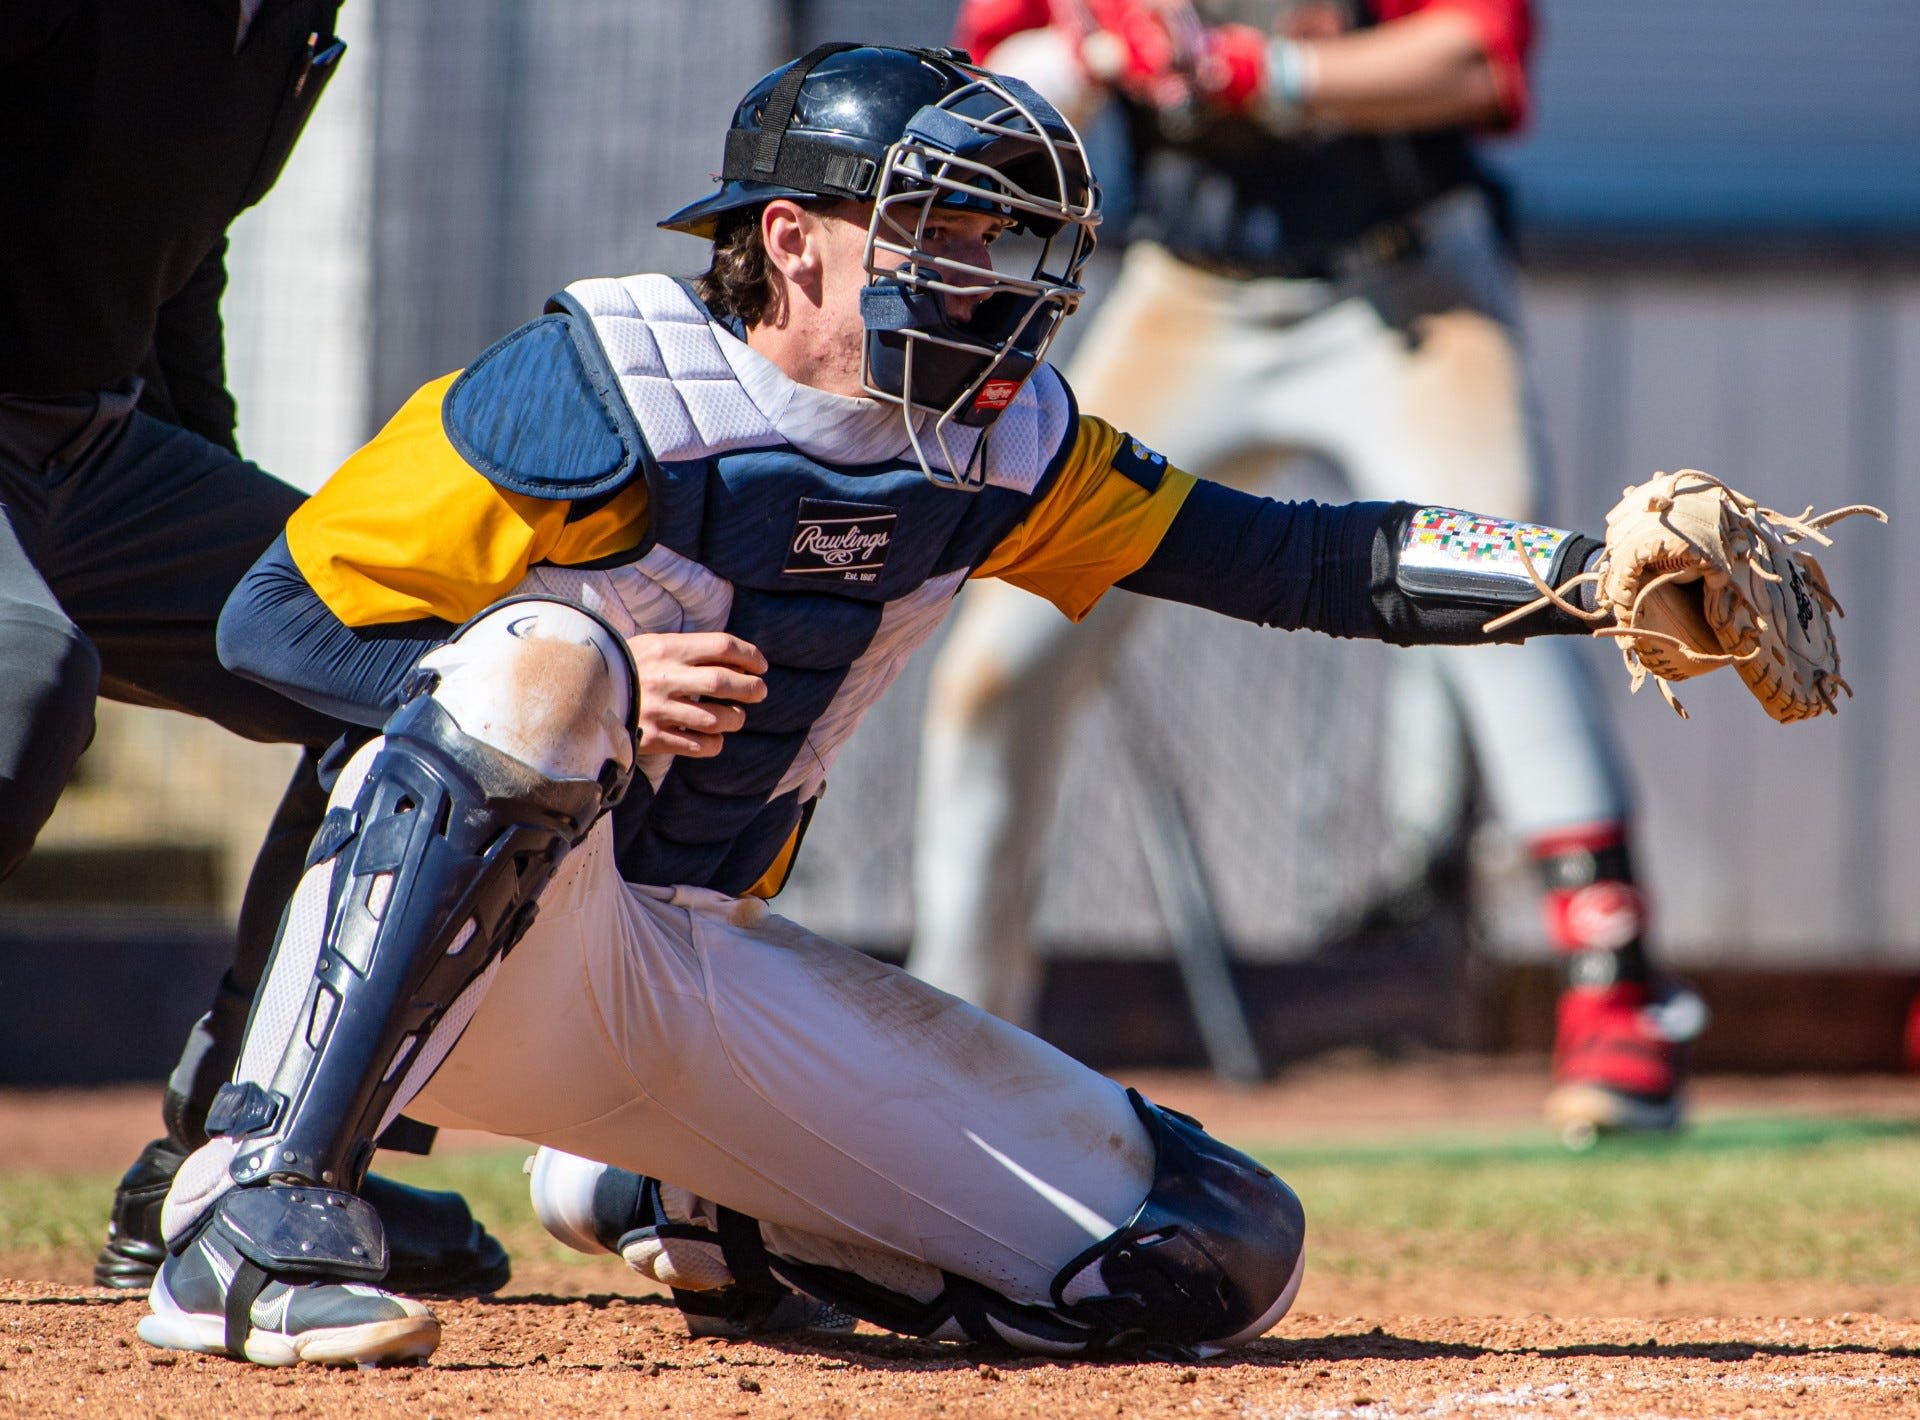 MLB draft: Canyon Brown, Seabreeze grad and N.C. A&T catcher, picked by Kansas City Royals